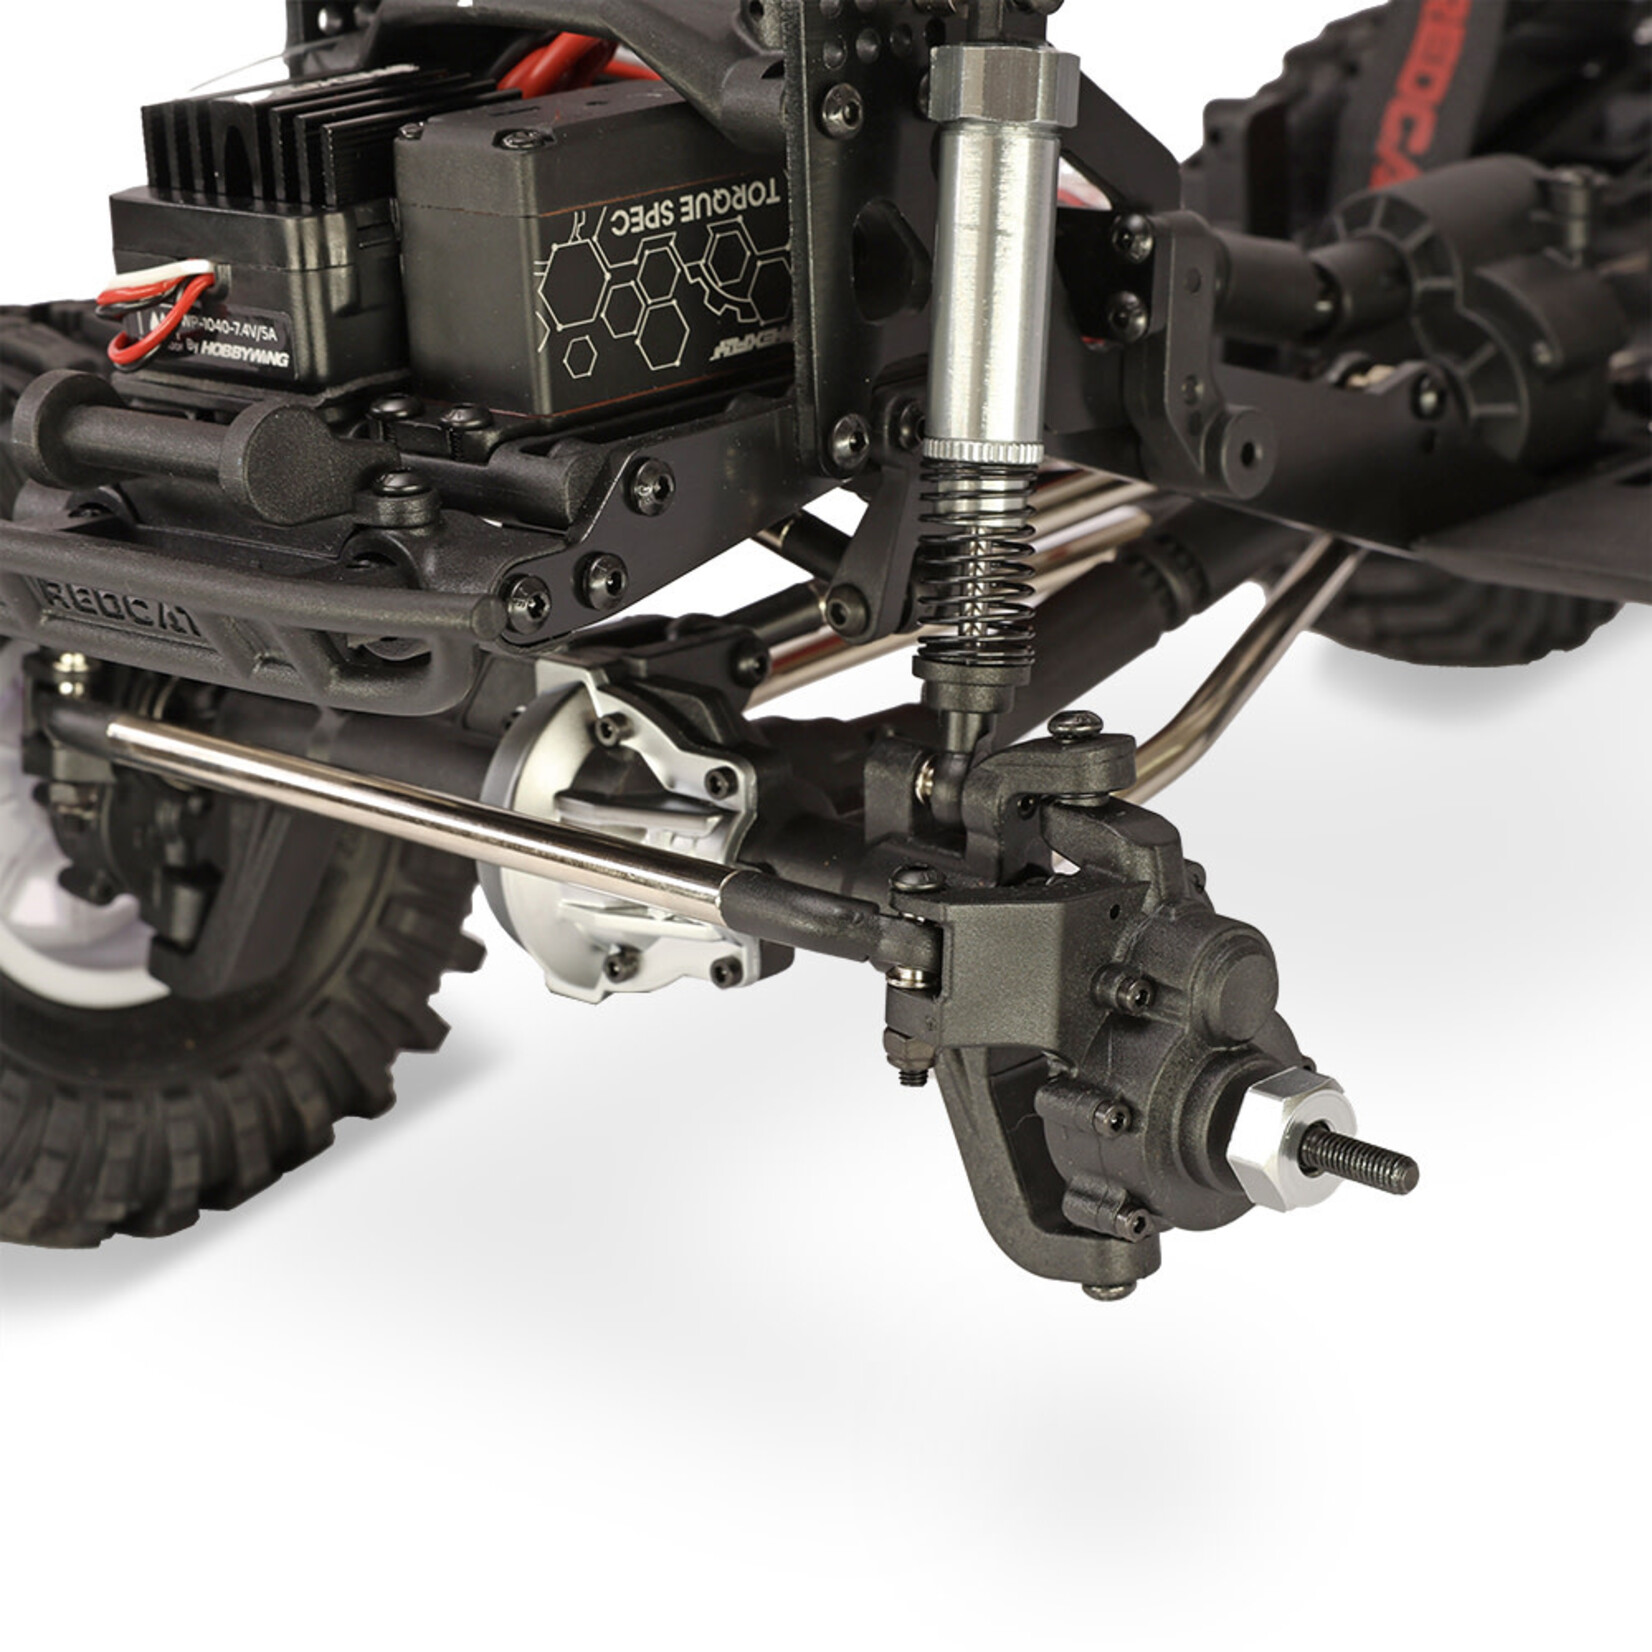 Redcat Racing Everest Ascent 1/10 Scale Crawler - BLUE